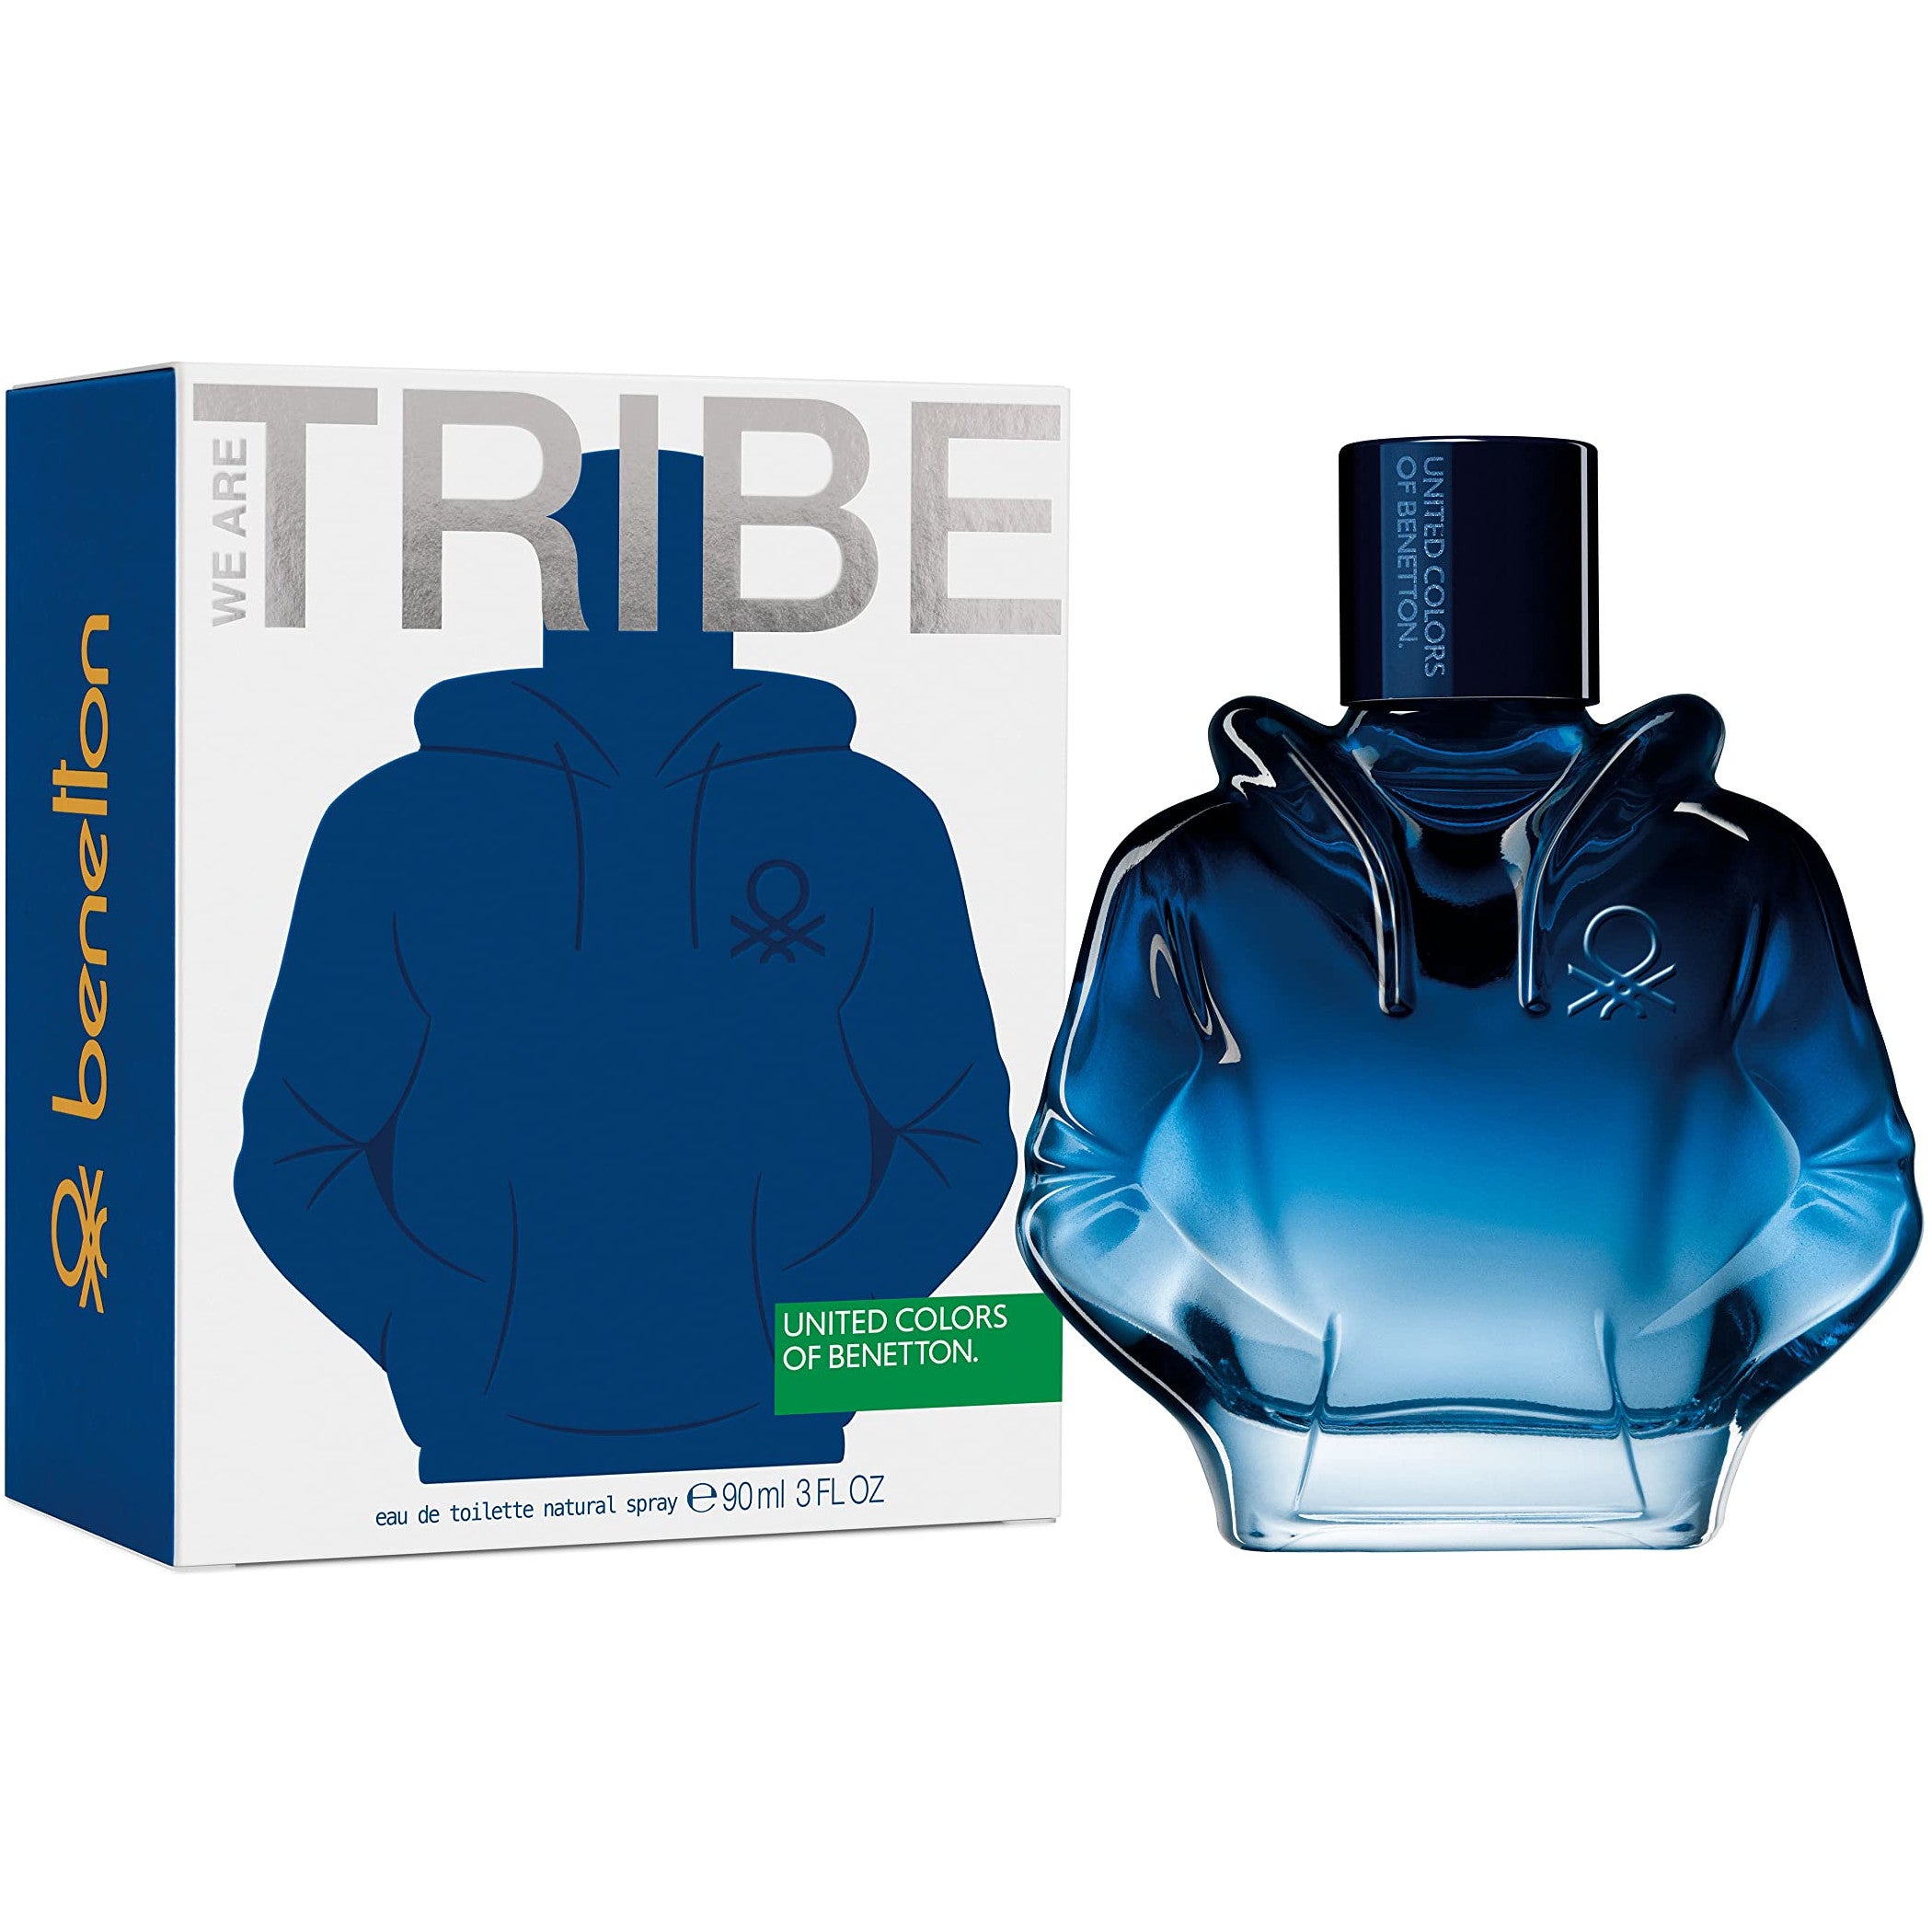 Perfume Hombre United Colors of Benetton Tribe EDT 90 mL